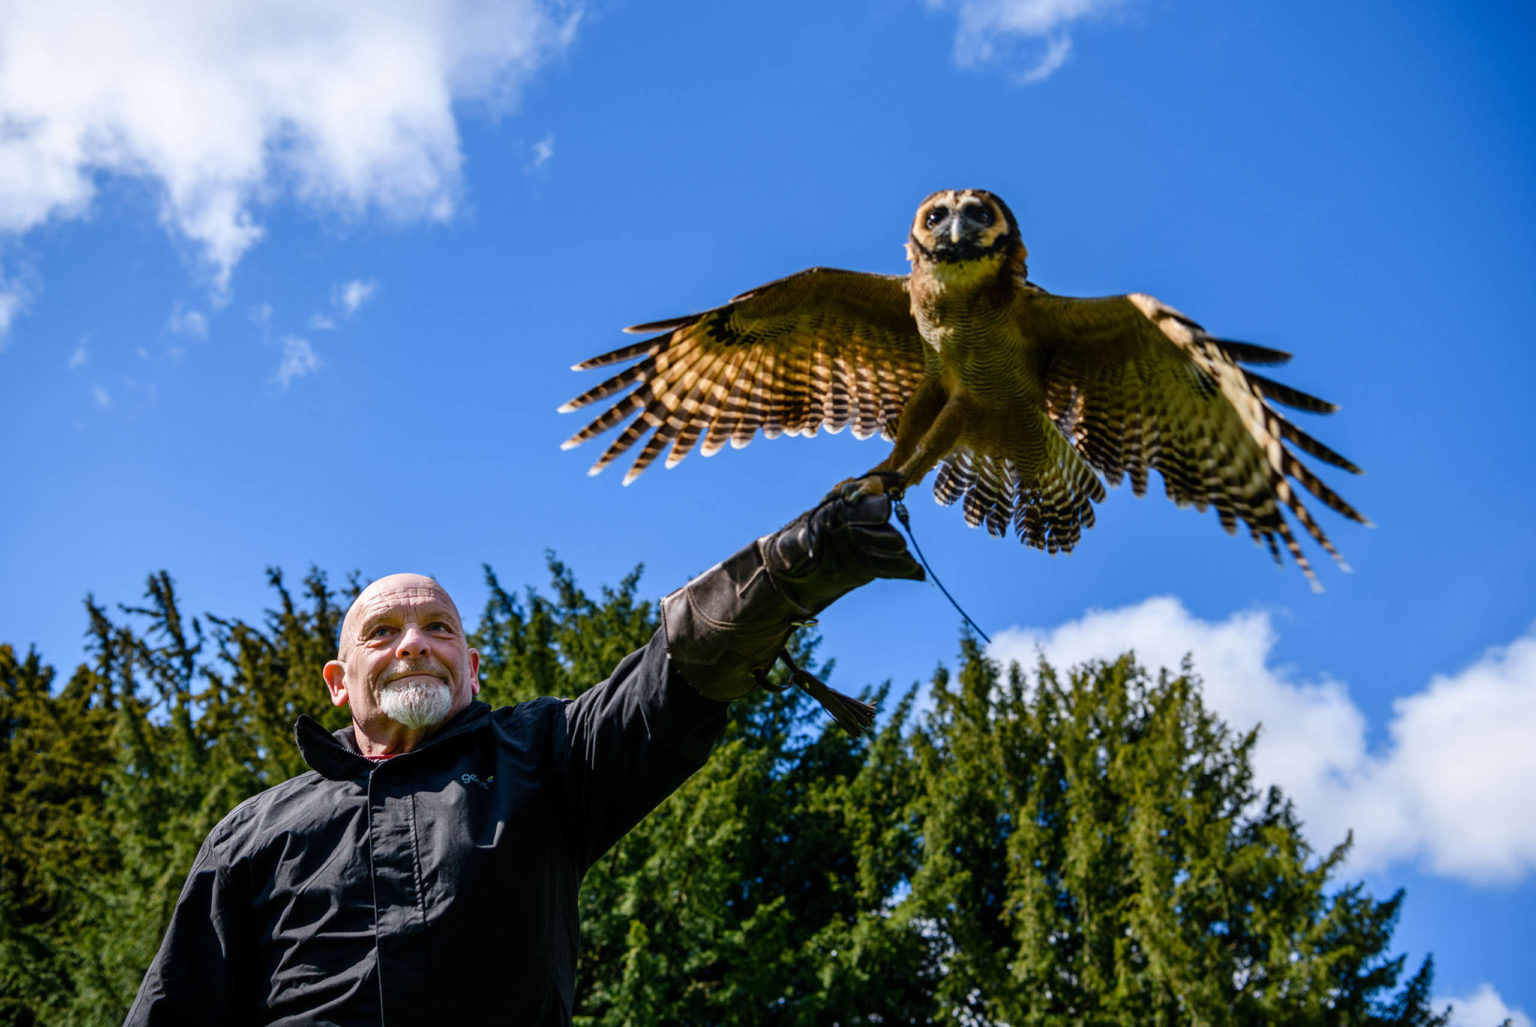 A man flying an owl during a Yorkshire birds of prey experience at Swinton Estate near Harrogate and the Yorkshire Dales